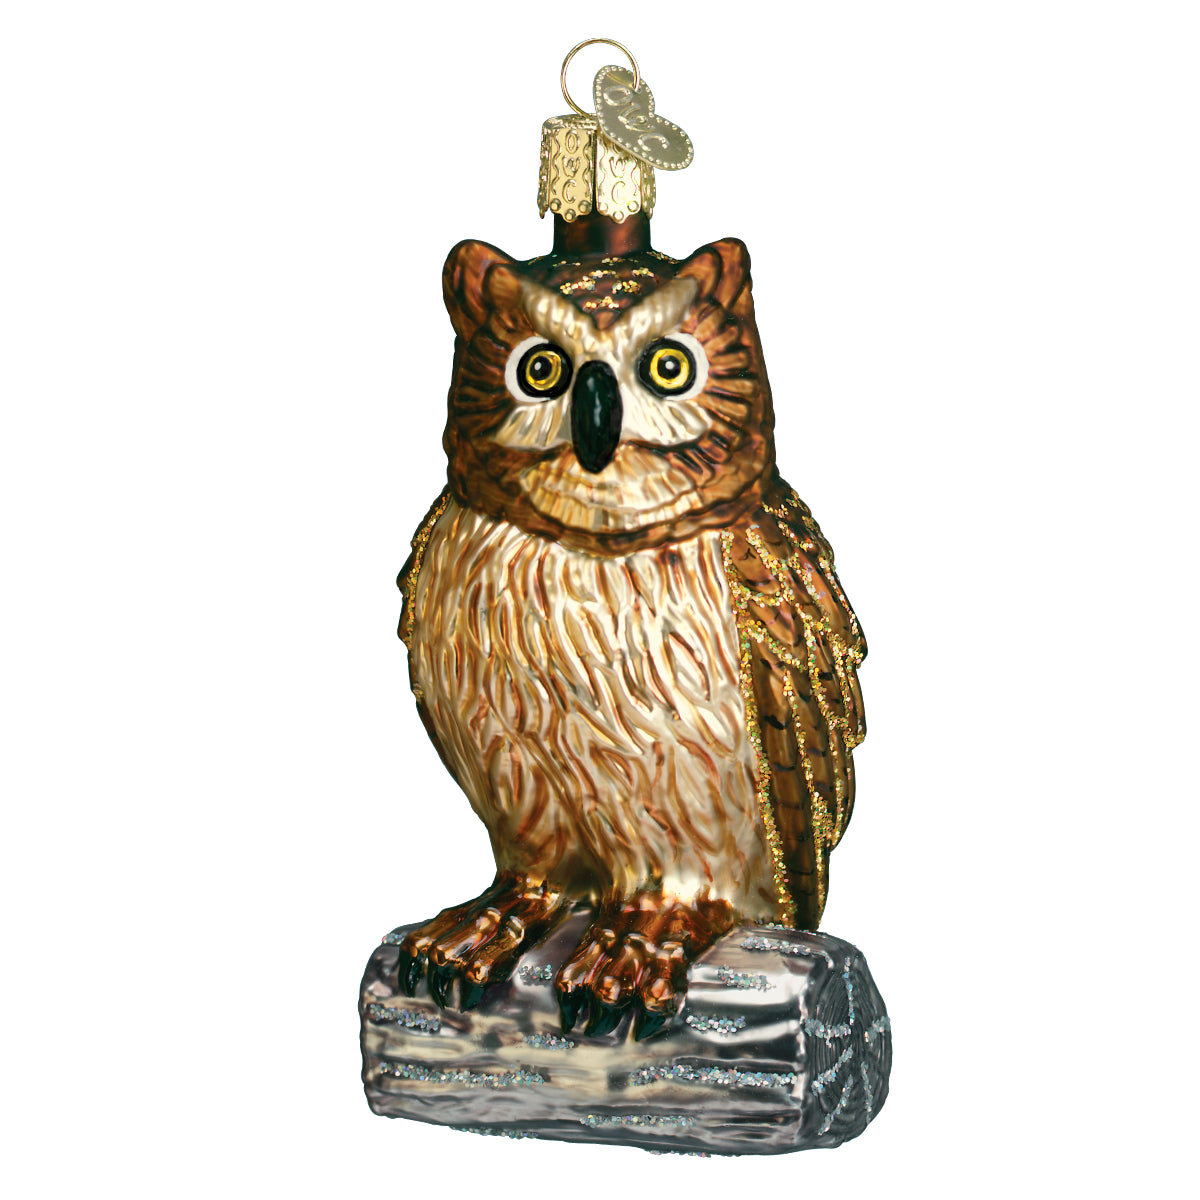 Wise Old Owl Ornament